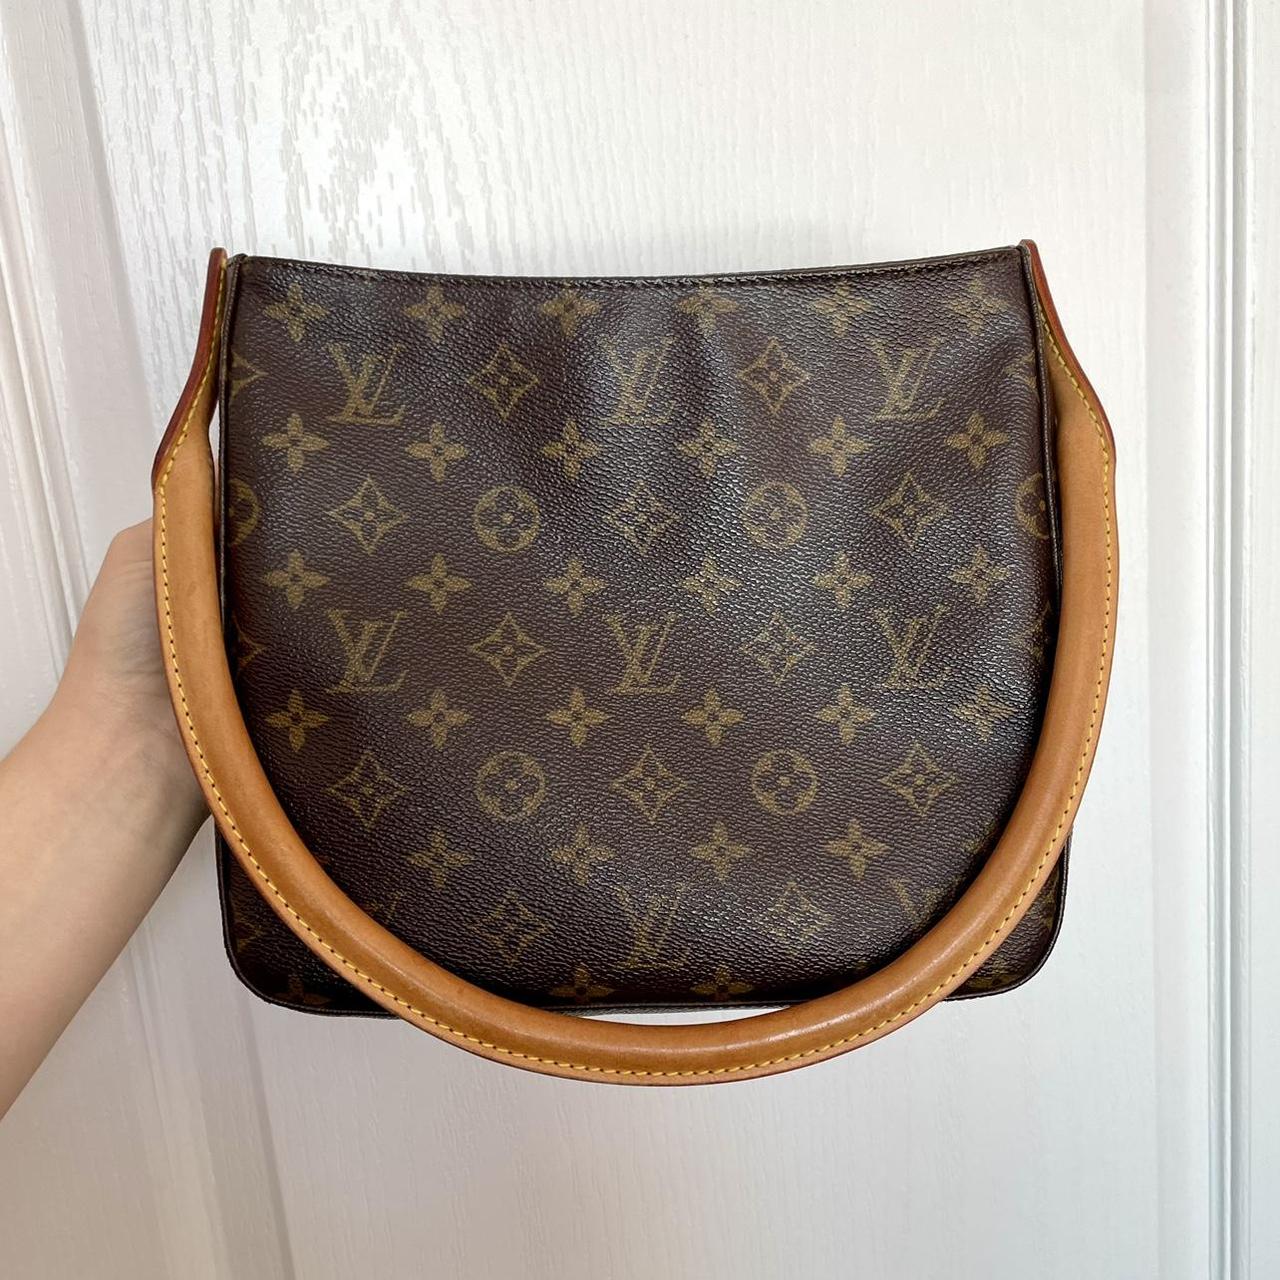 LOUIS VUITTON Looping PM. This is a lil beauty. In - Depop